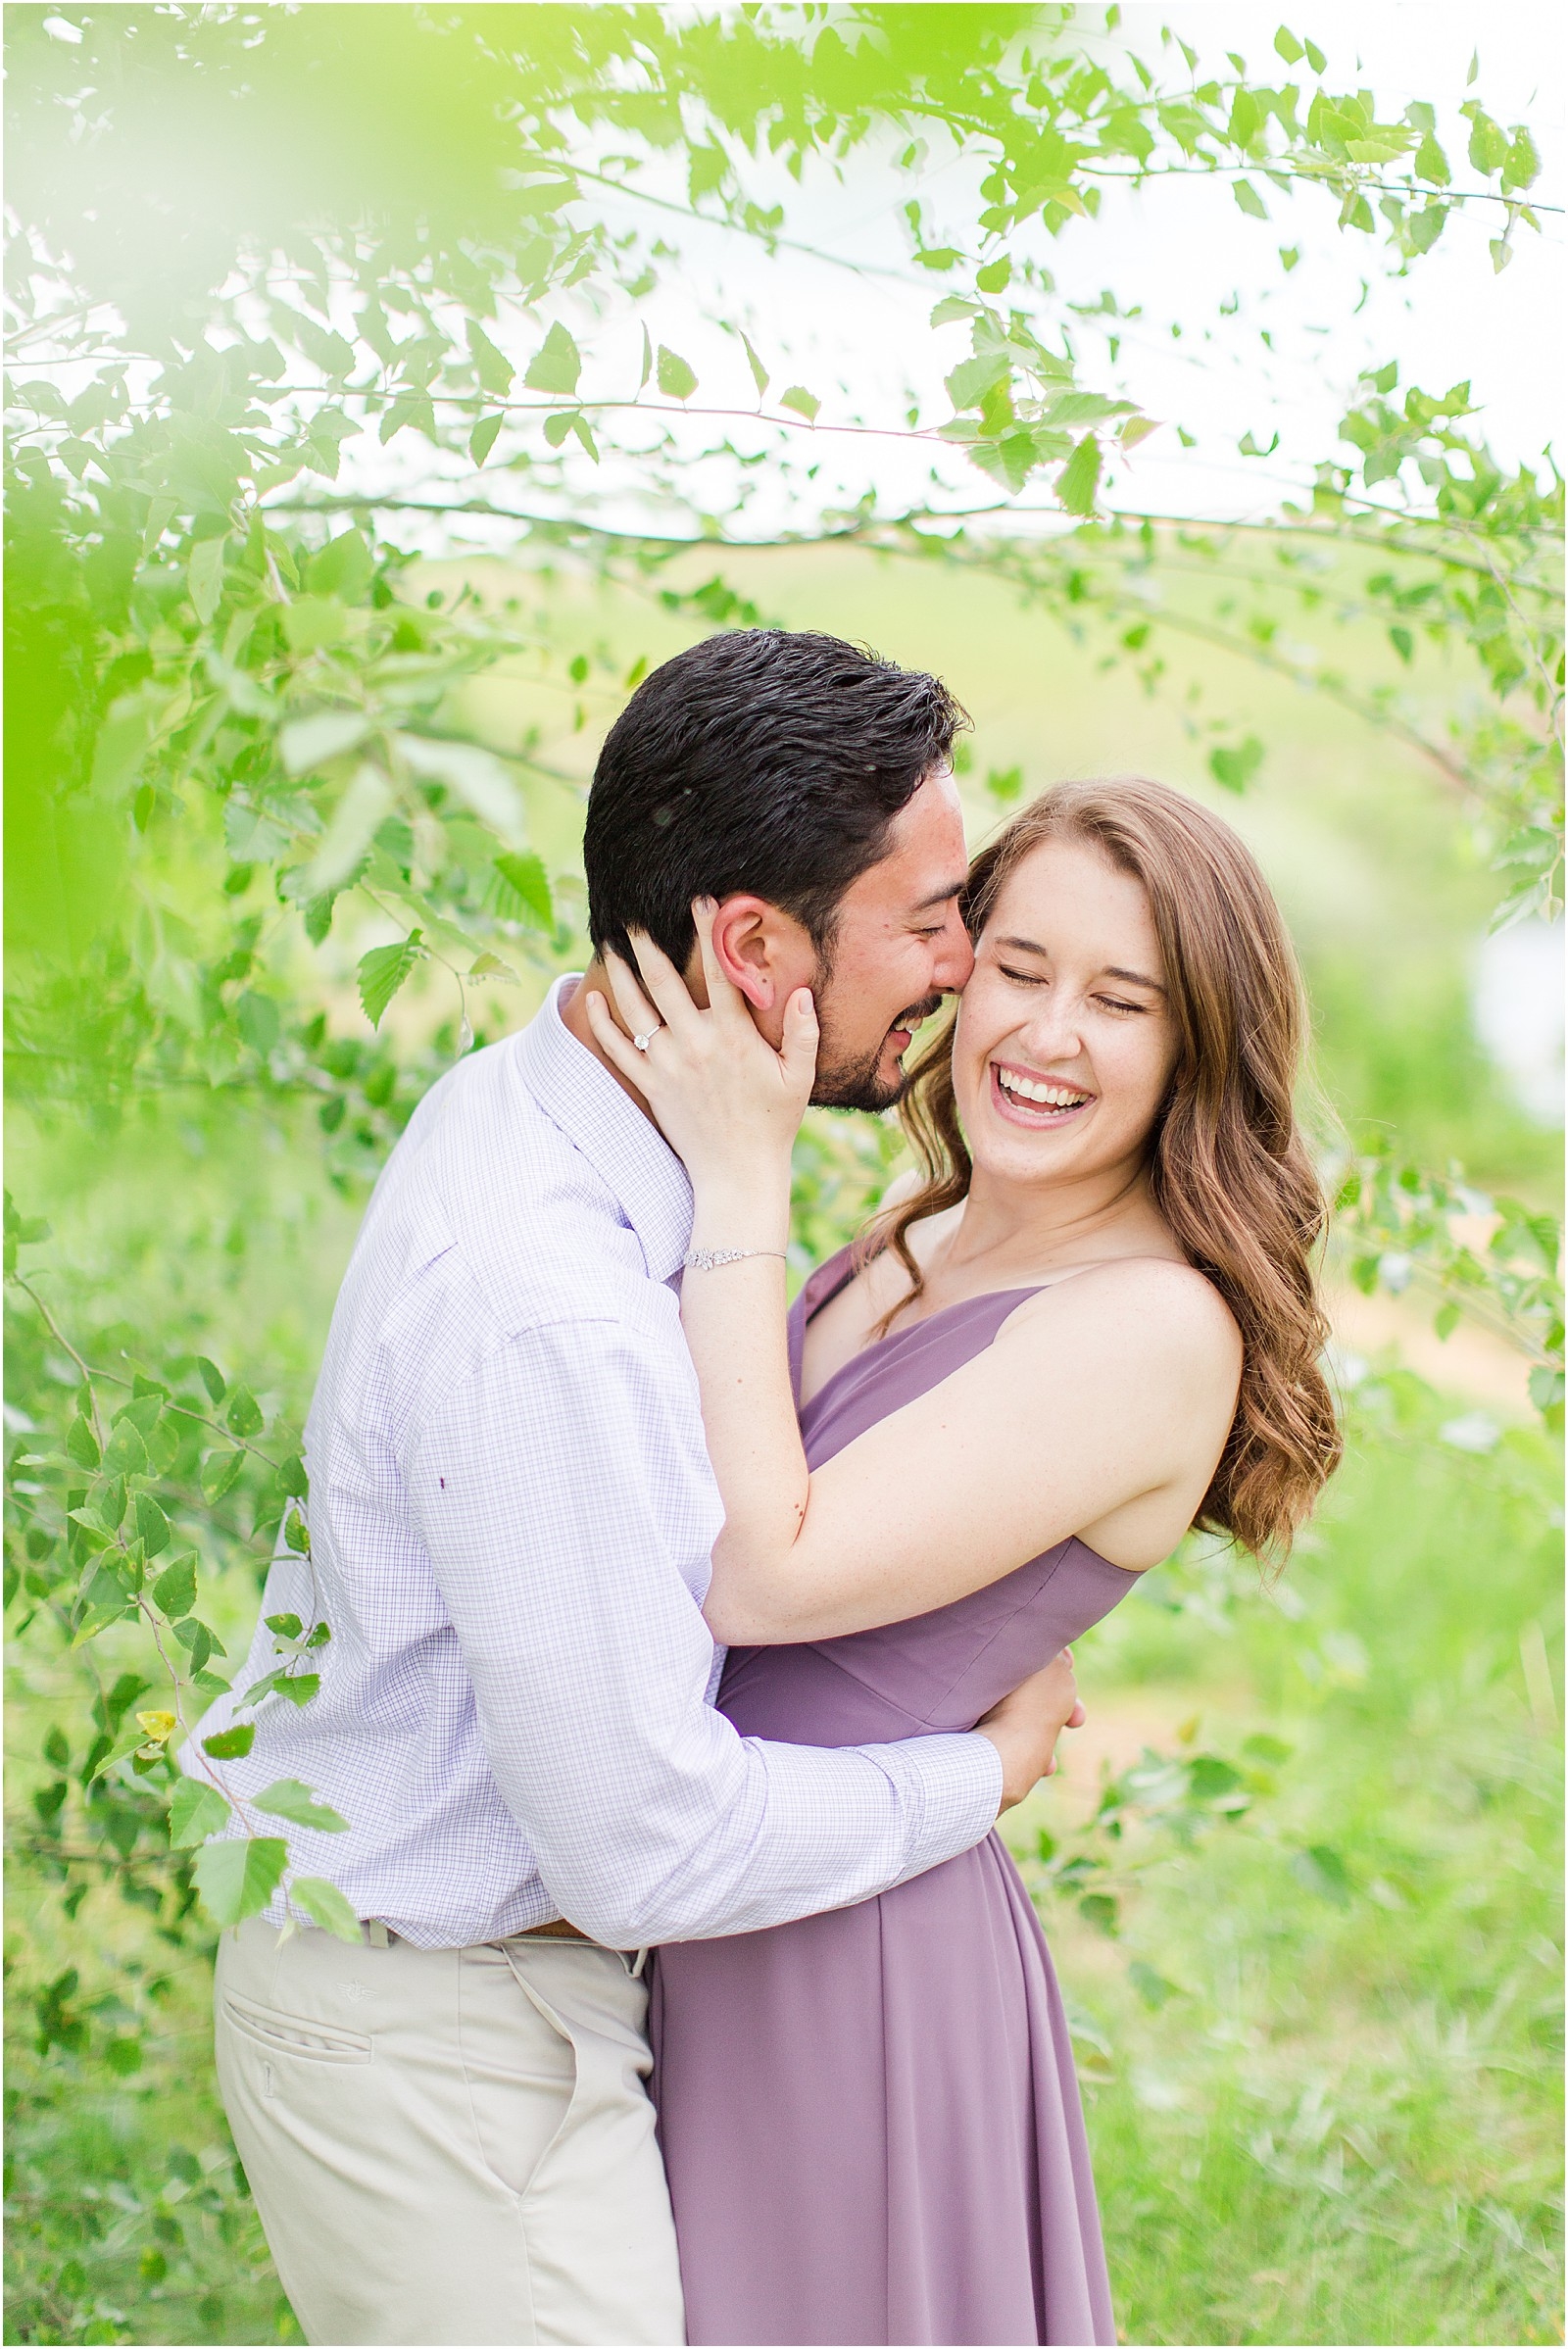 A Stone Tower Winery Leesburgh Engagement Session | Caitlin and Jason 011.jpg